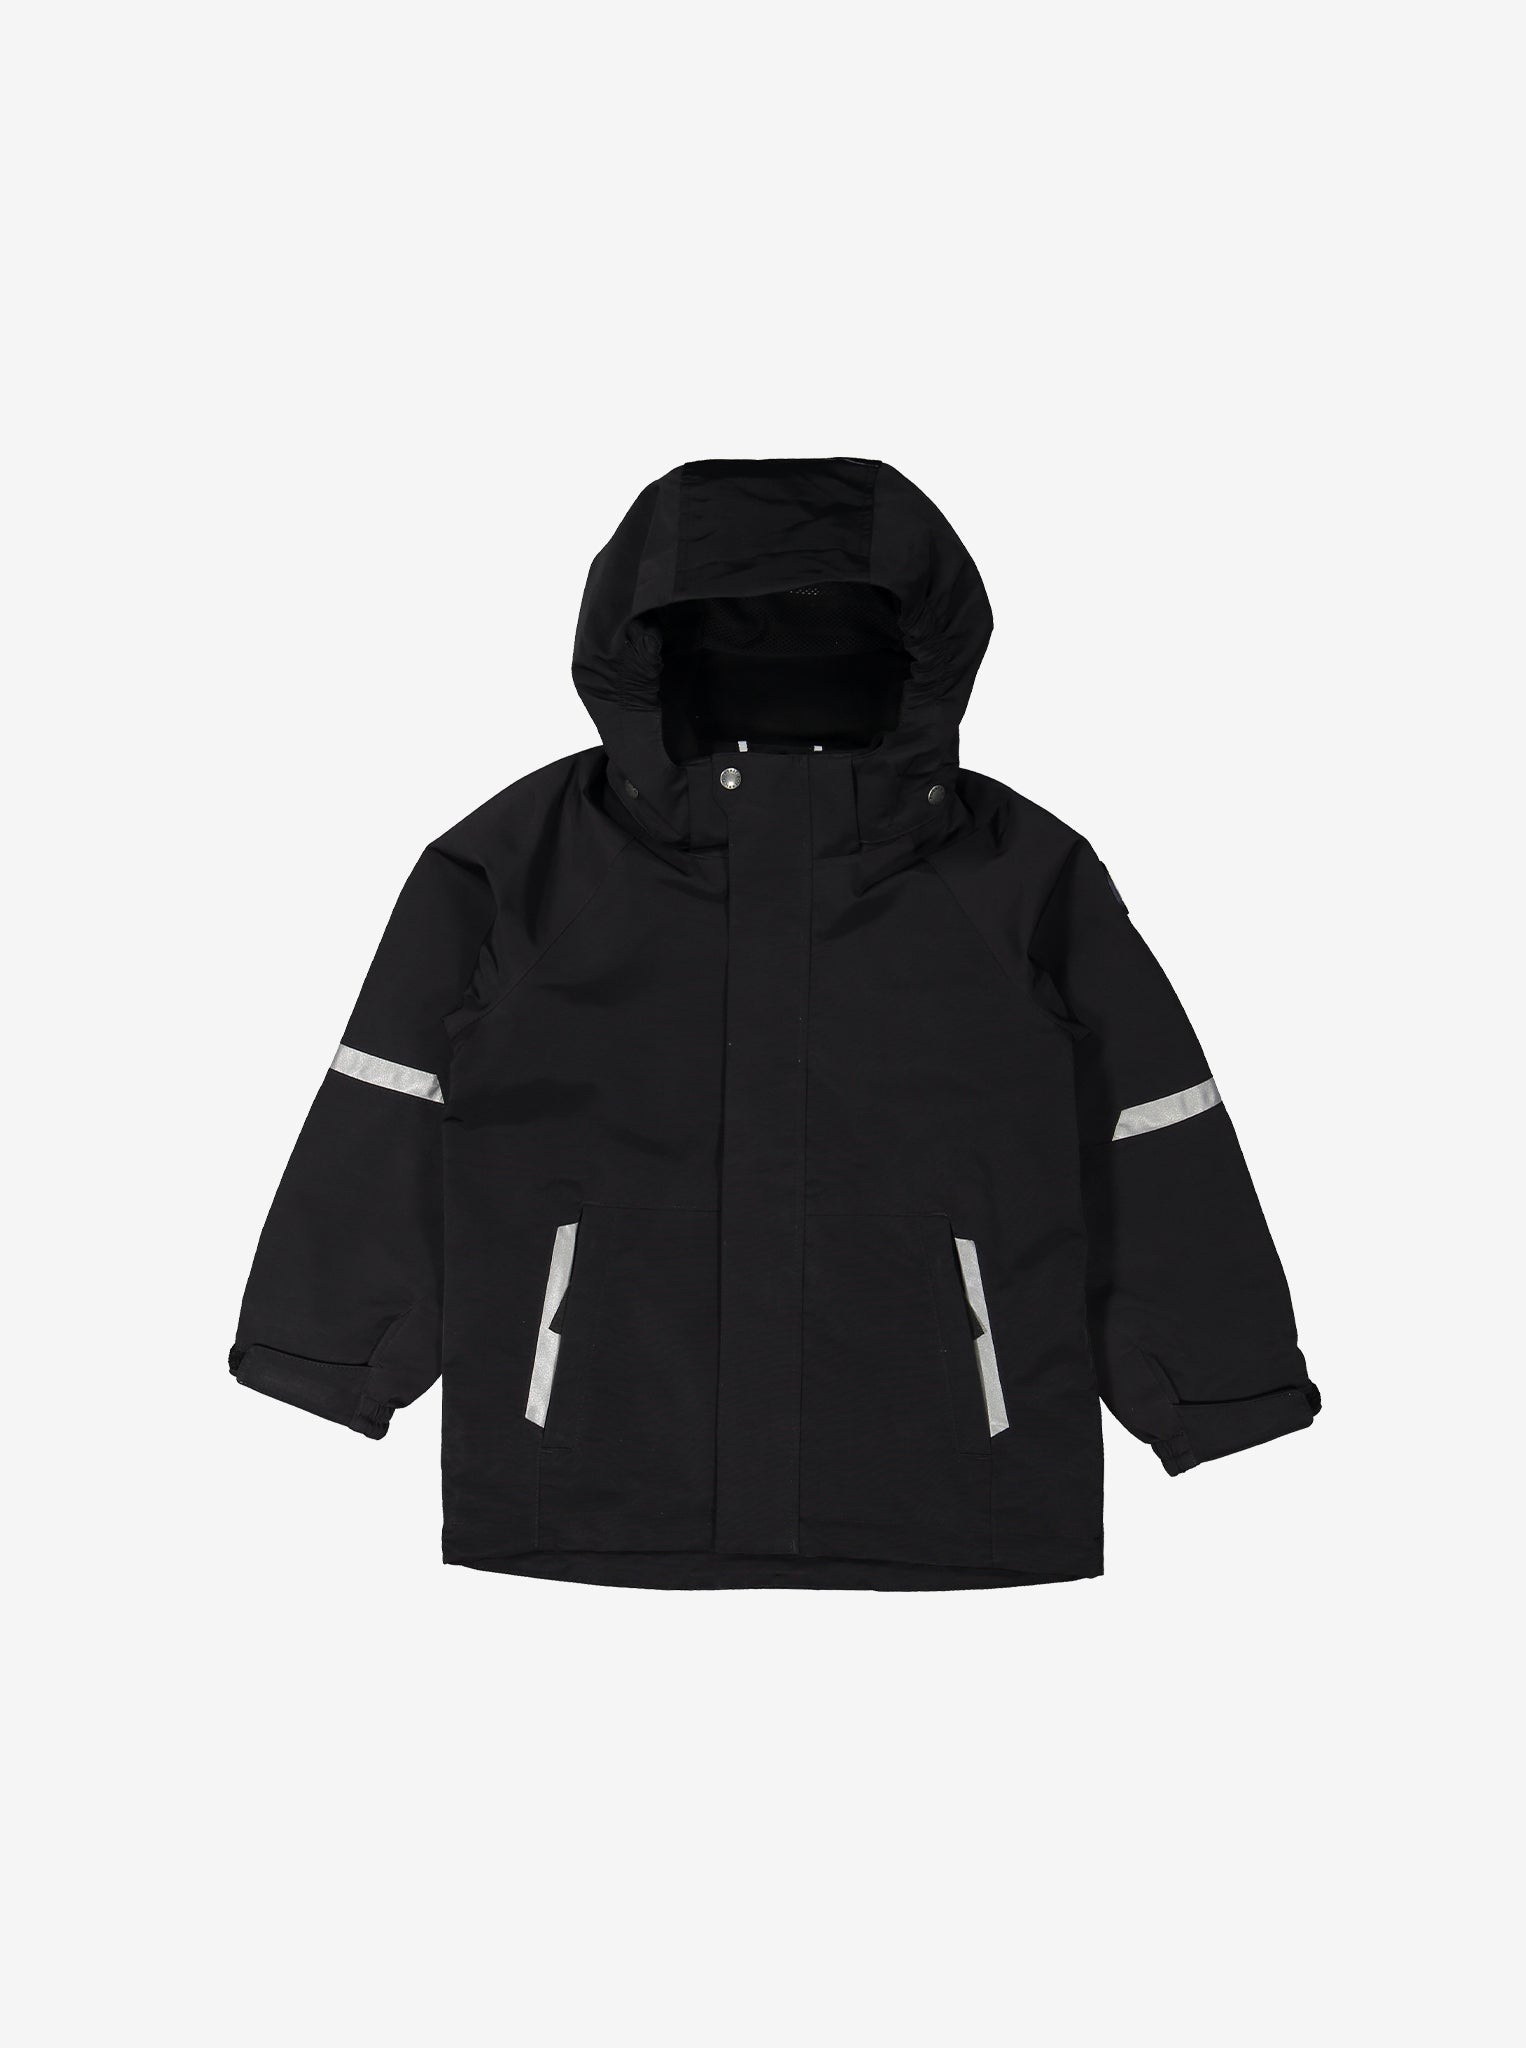 Kids Black Waterproof Shell Jacket from the Polarn O. Pyret kidswear collection. The best ethical kids outerwear.